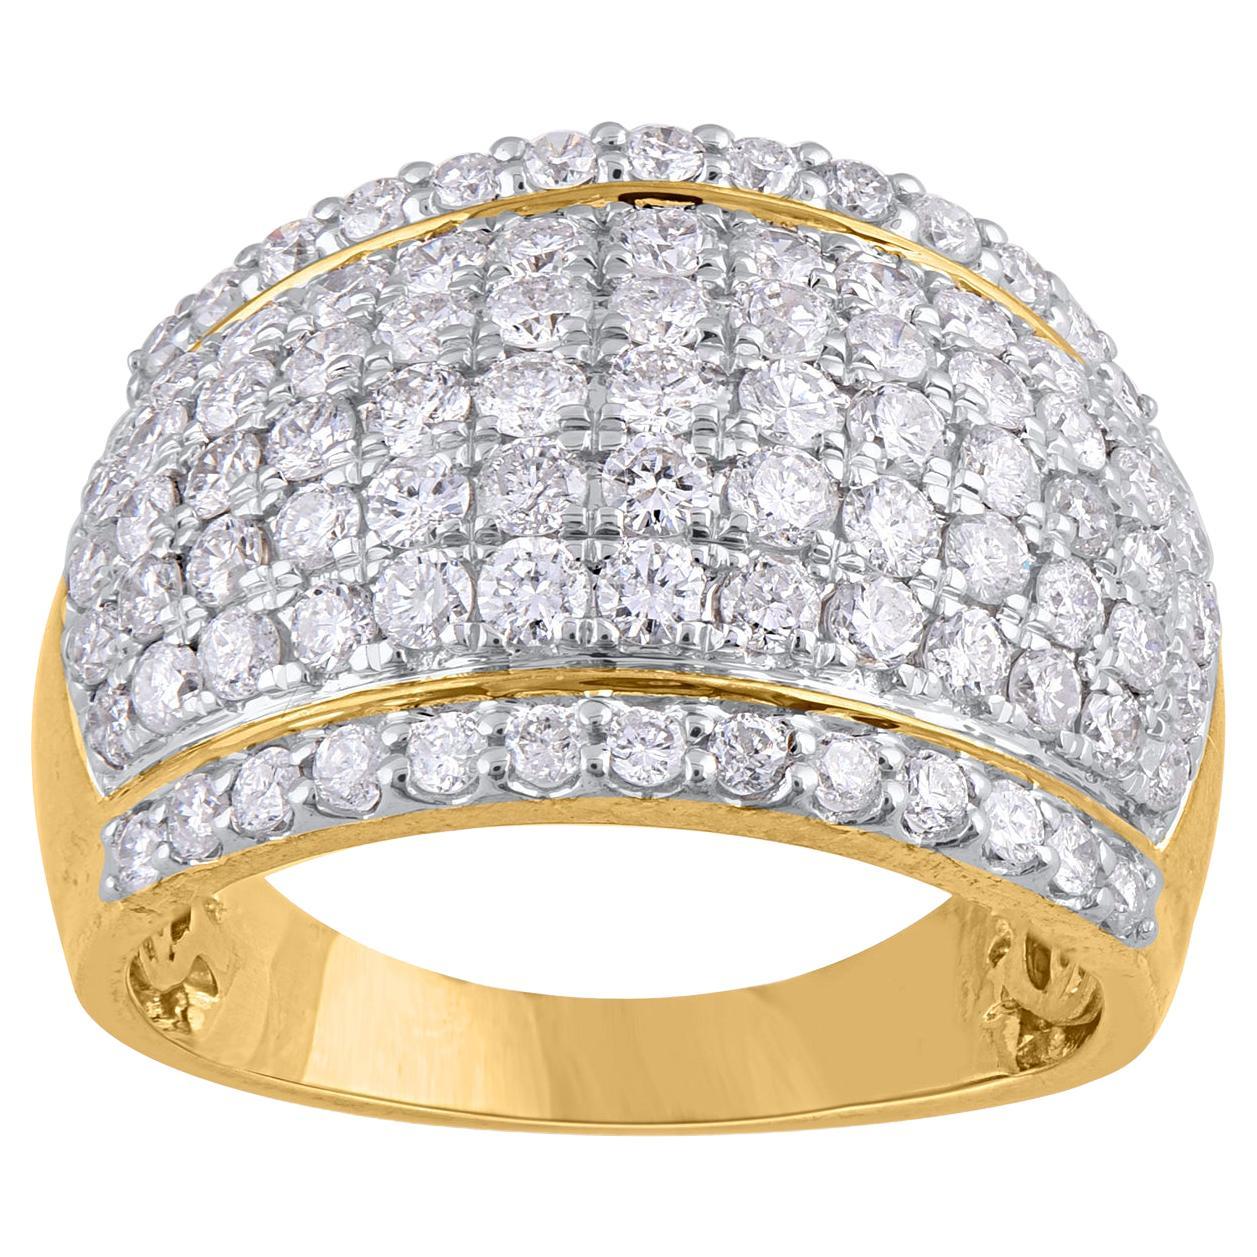 TJD 2.0 Carat Brilliant Cut Diamond Anniversary Band Ring in 14KT Yellow Gold For Sale